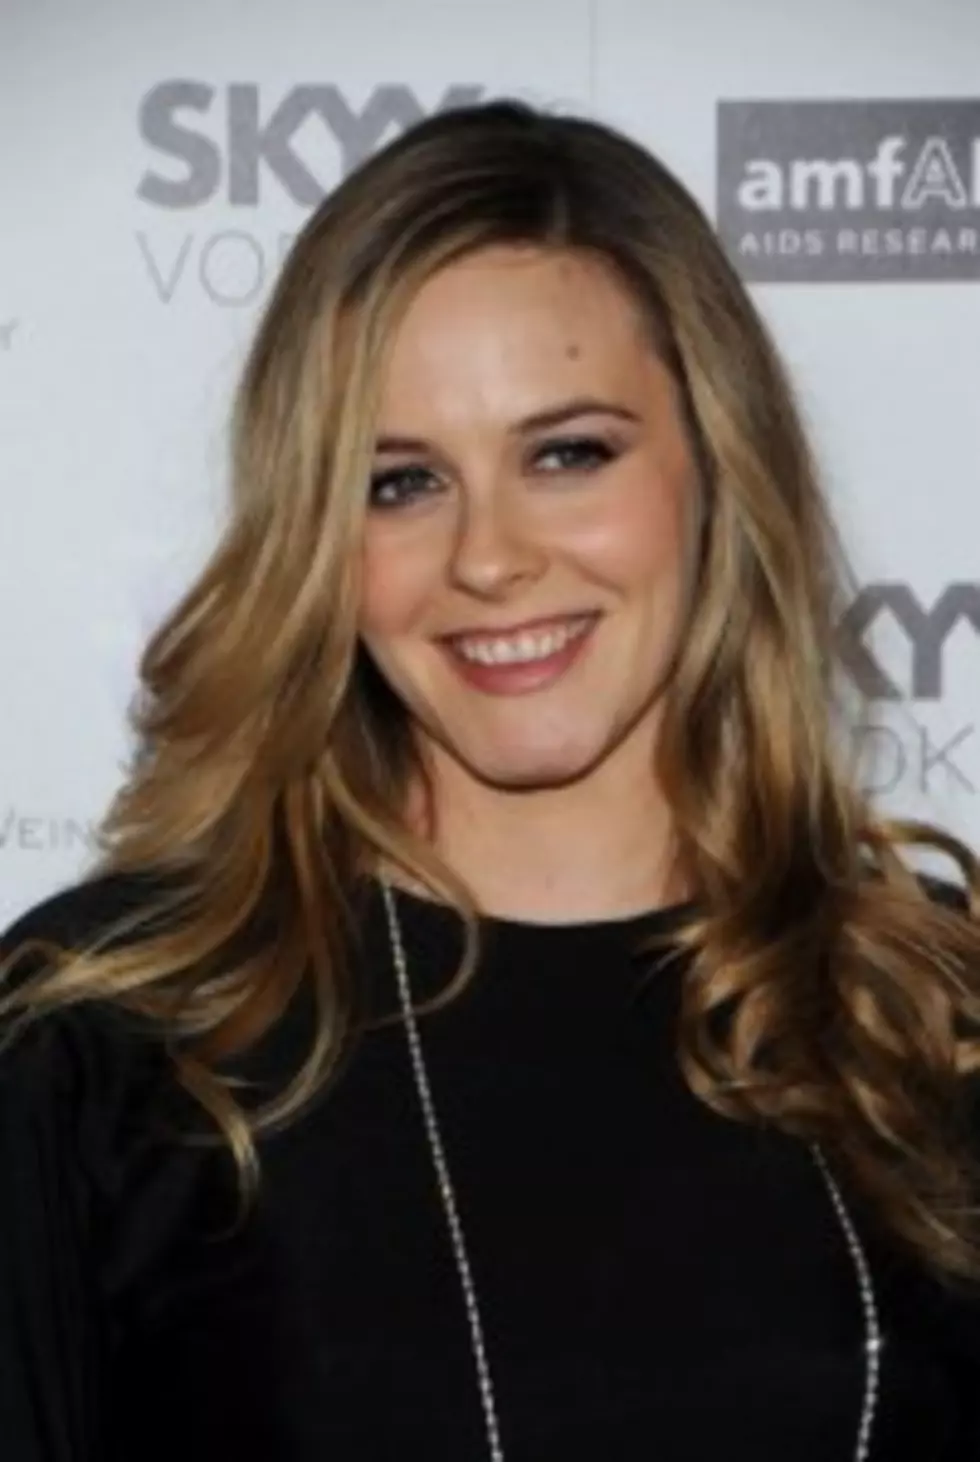 Alicia Silverstone Expecting A Baby